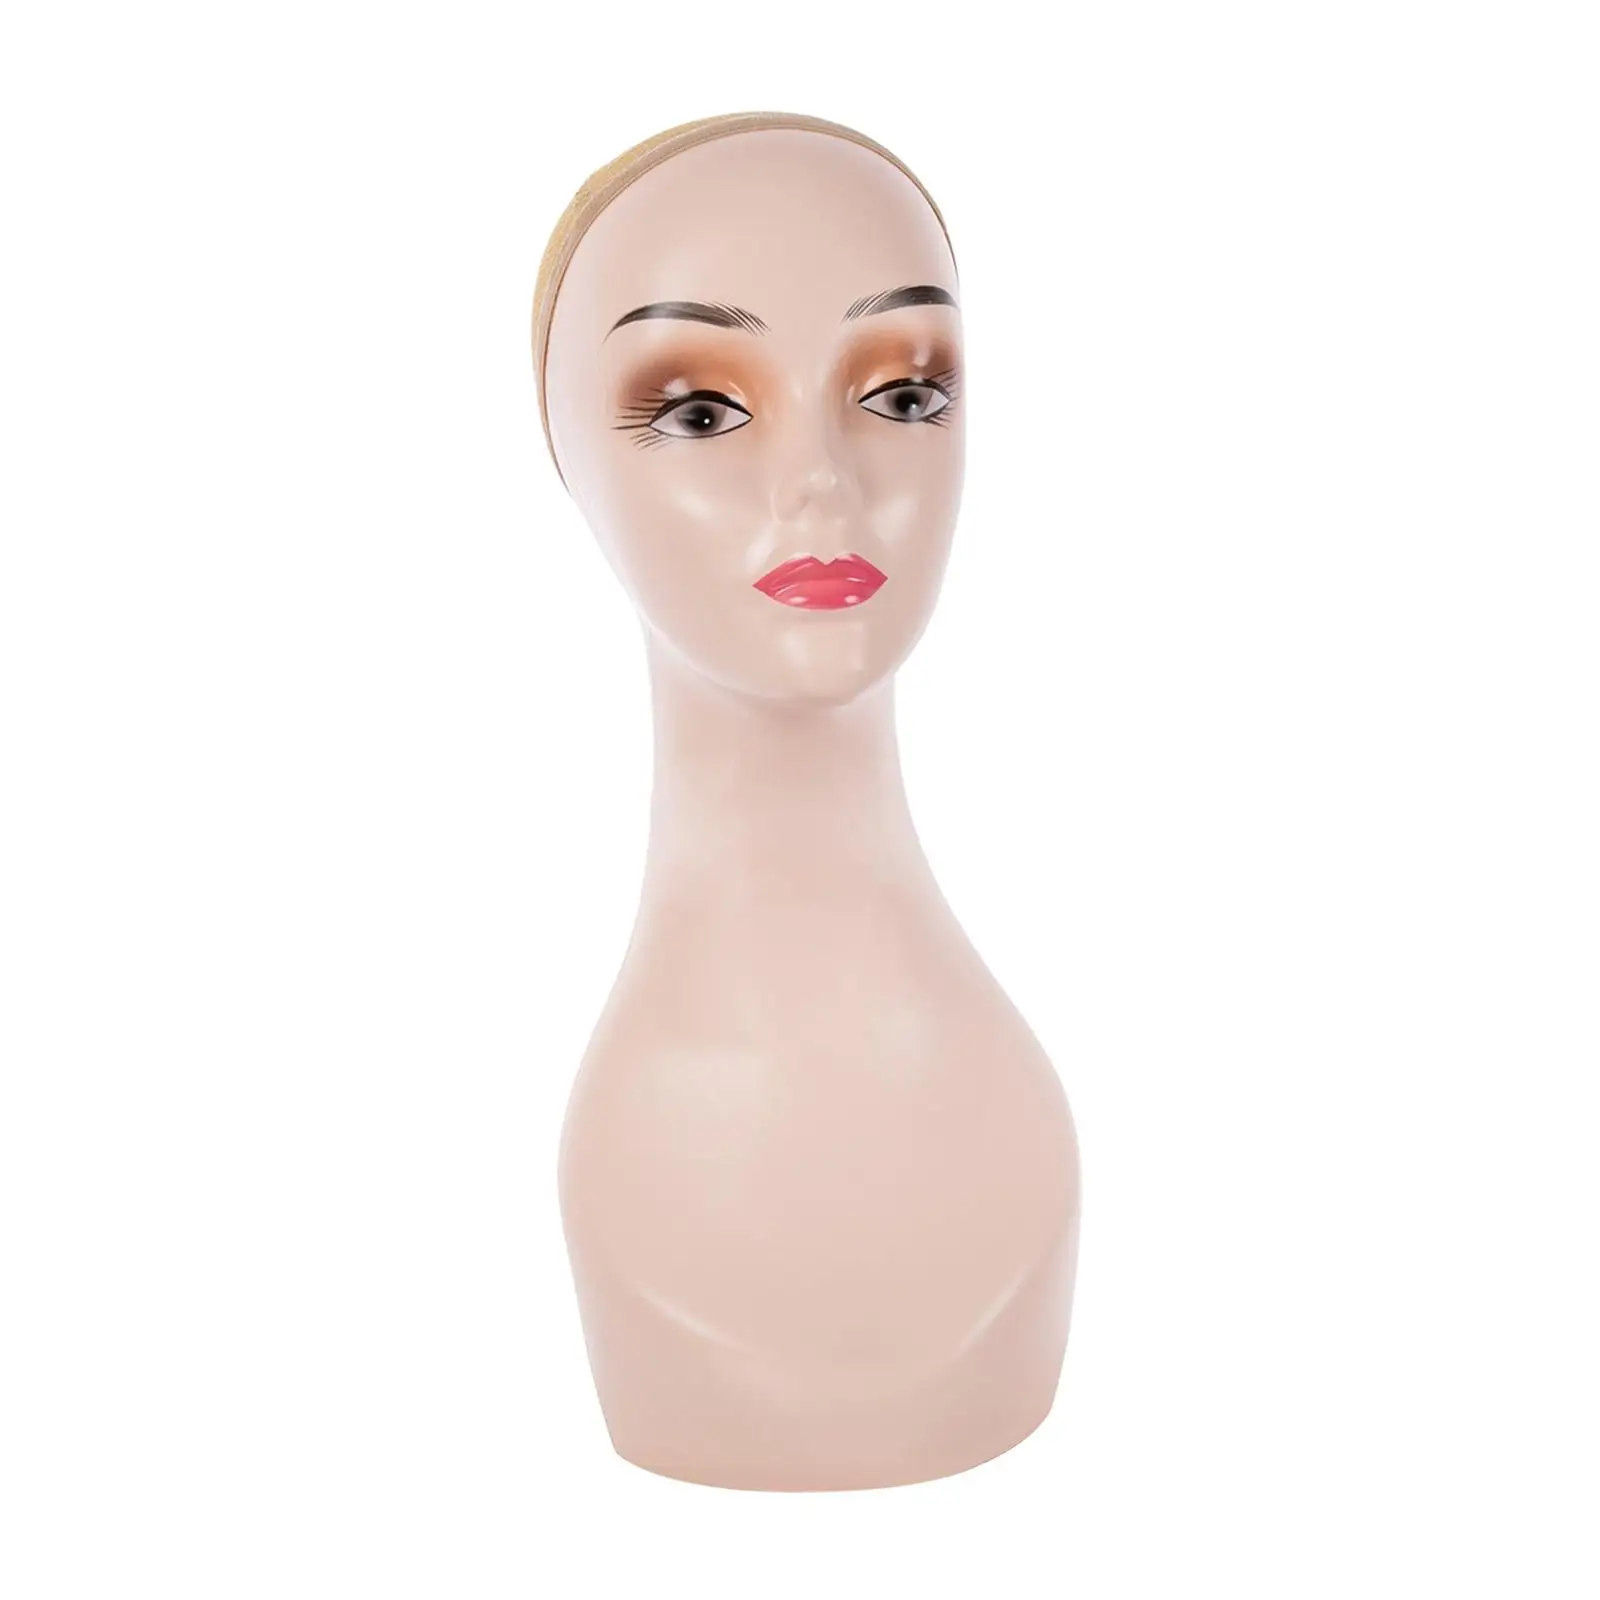 Female Bald Mannequin Head Smooth Manikin for Wigs Displaying Making Styling